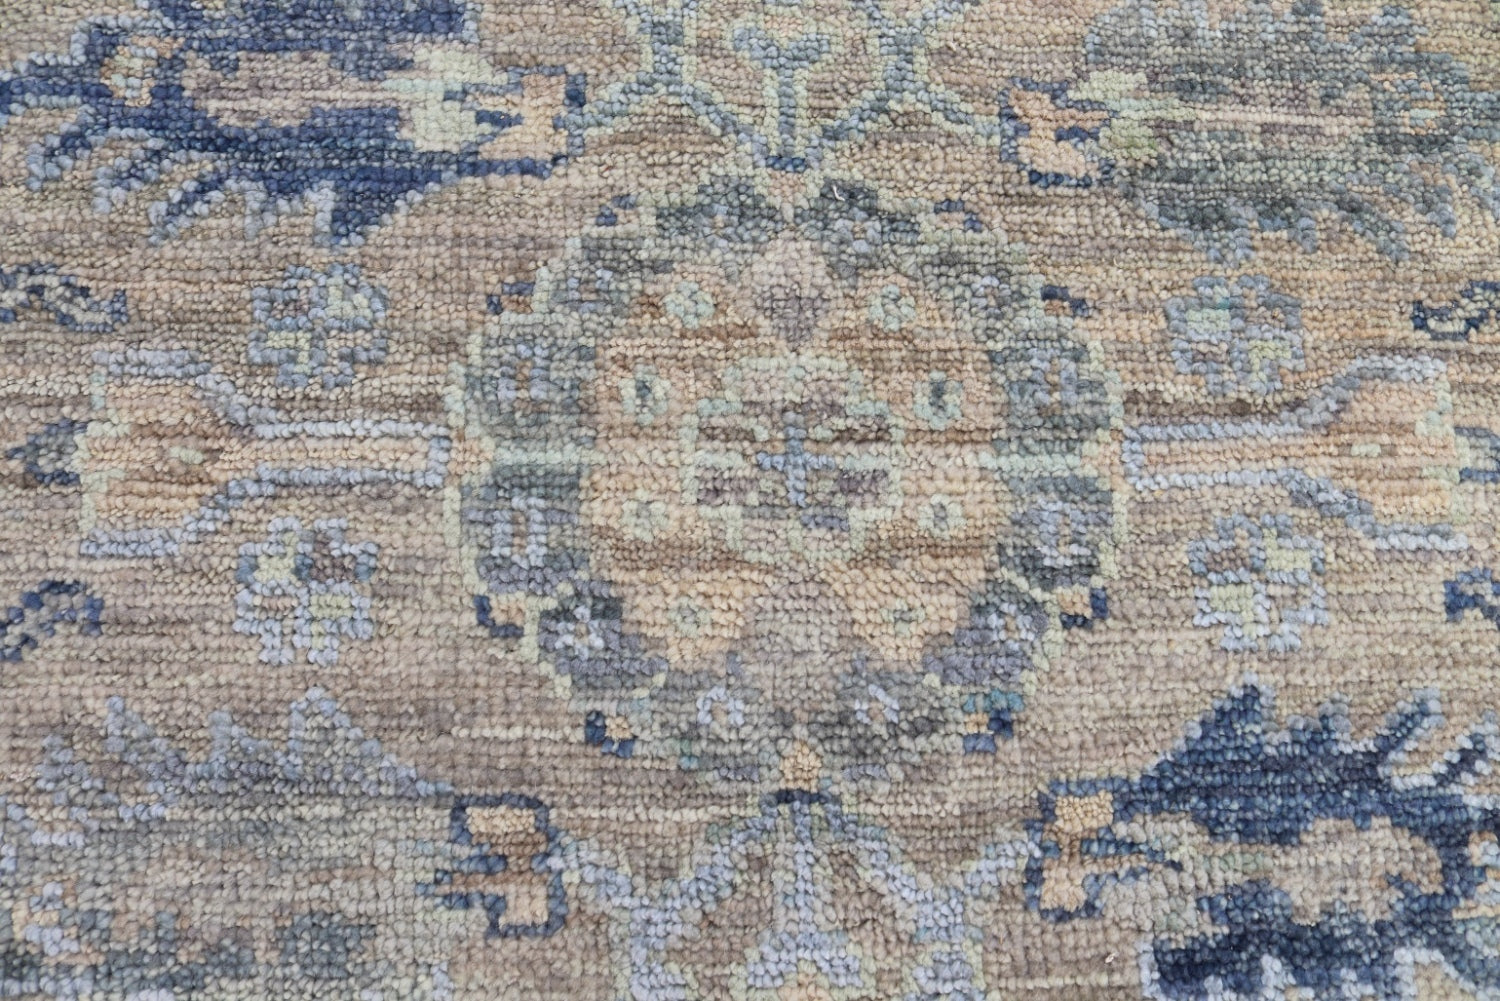 Sultanabad 2 Handwoven Traditional Rug, J71791